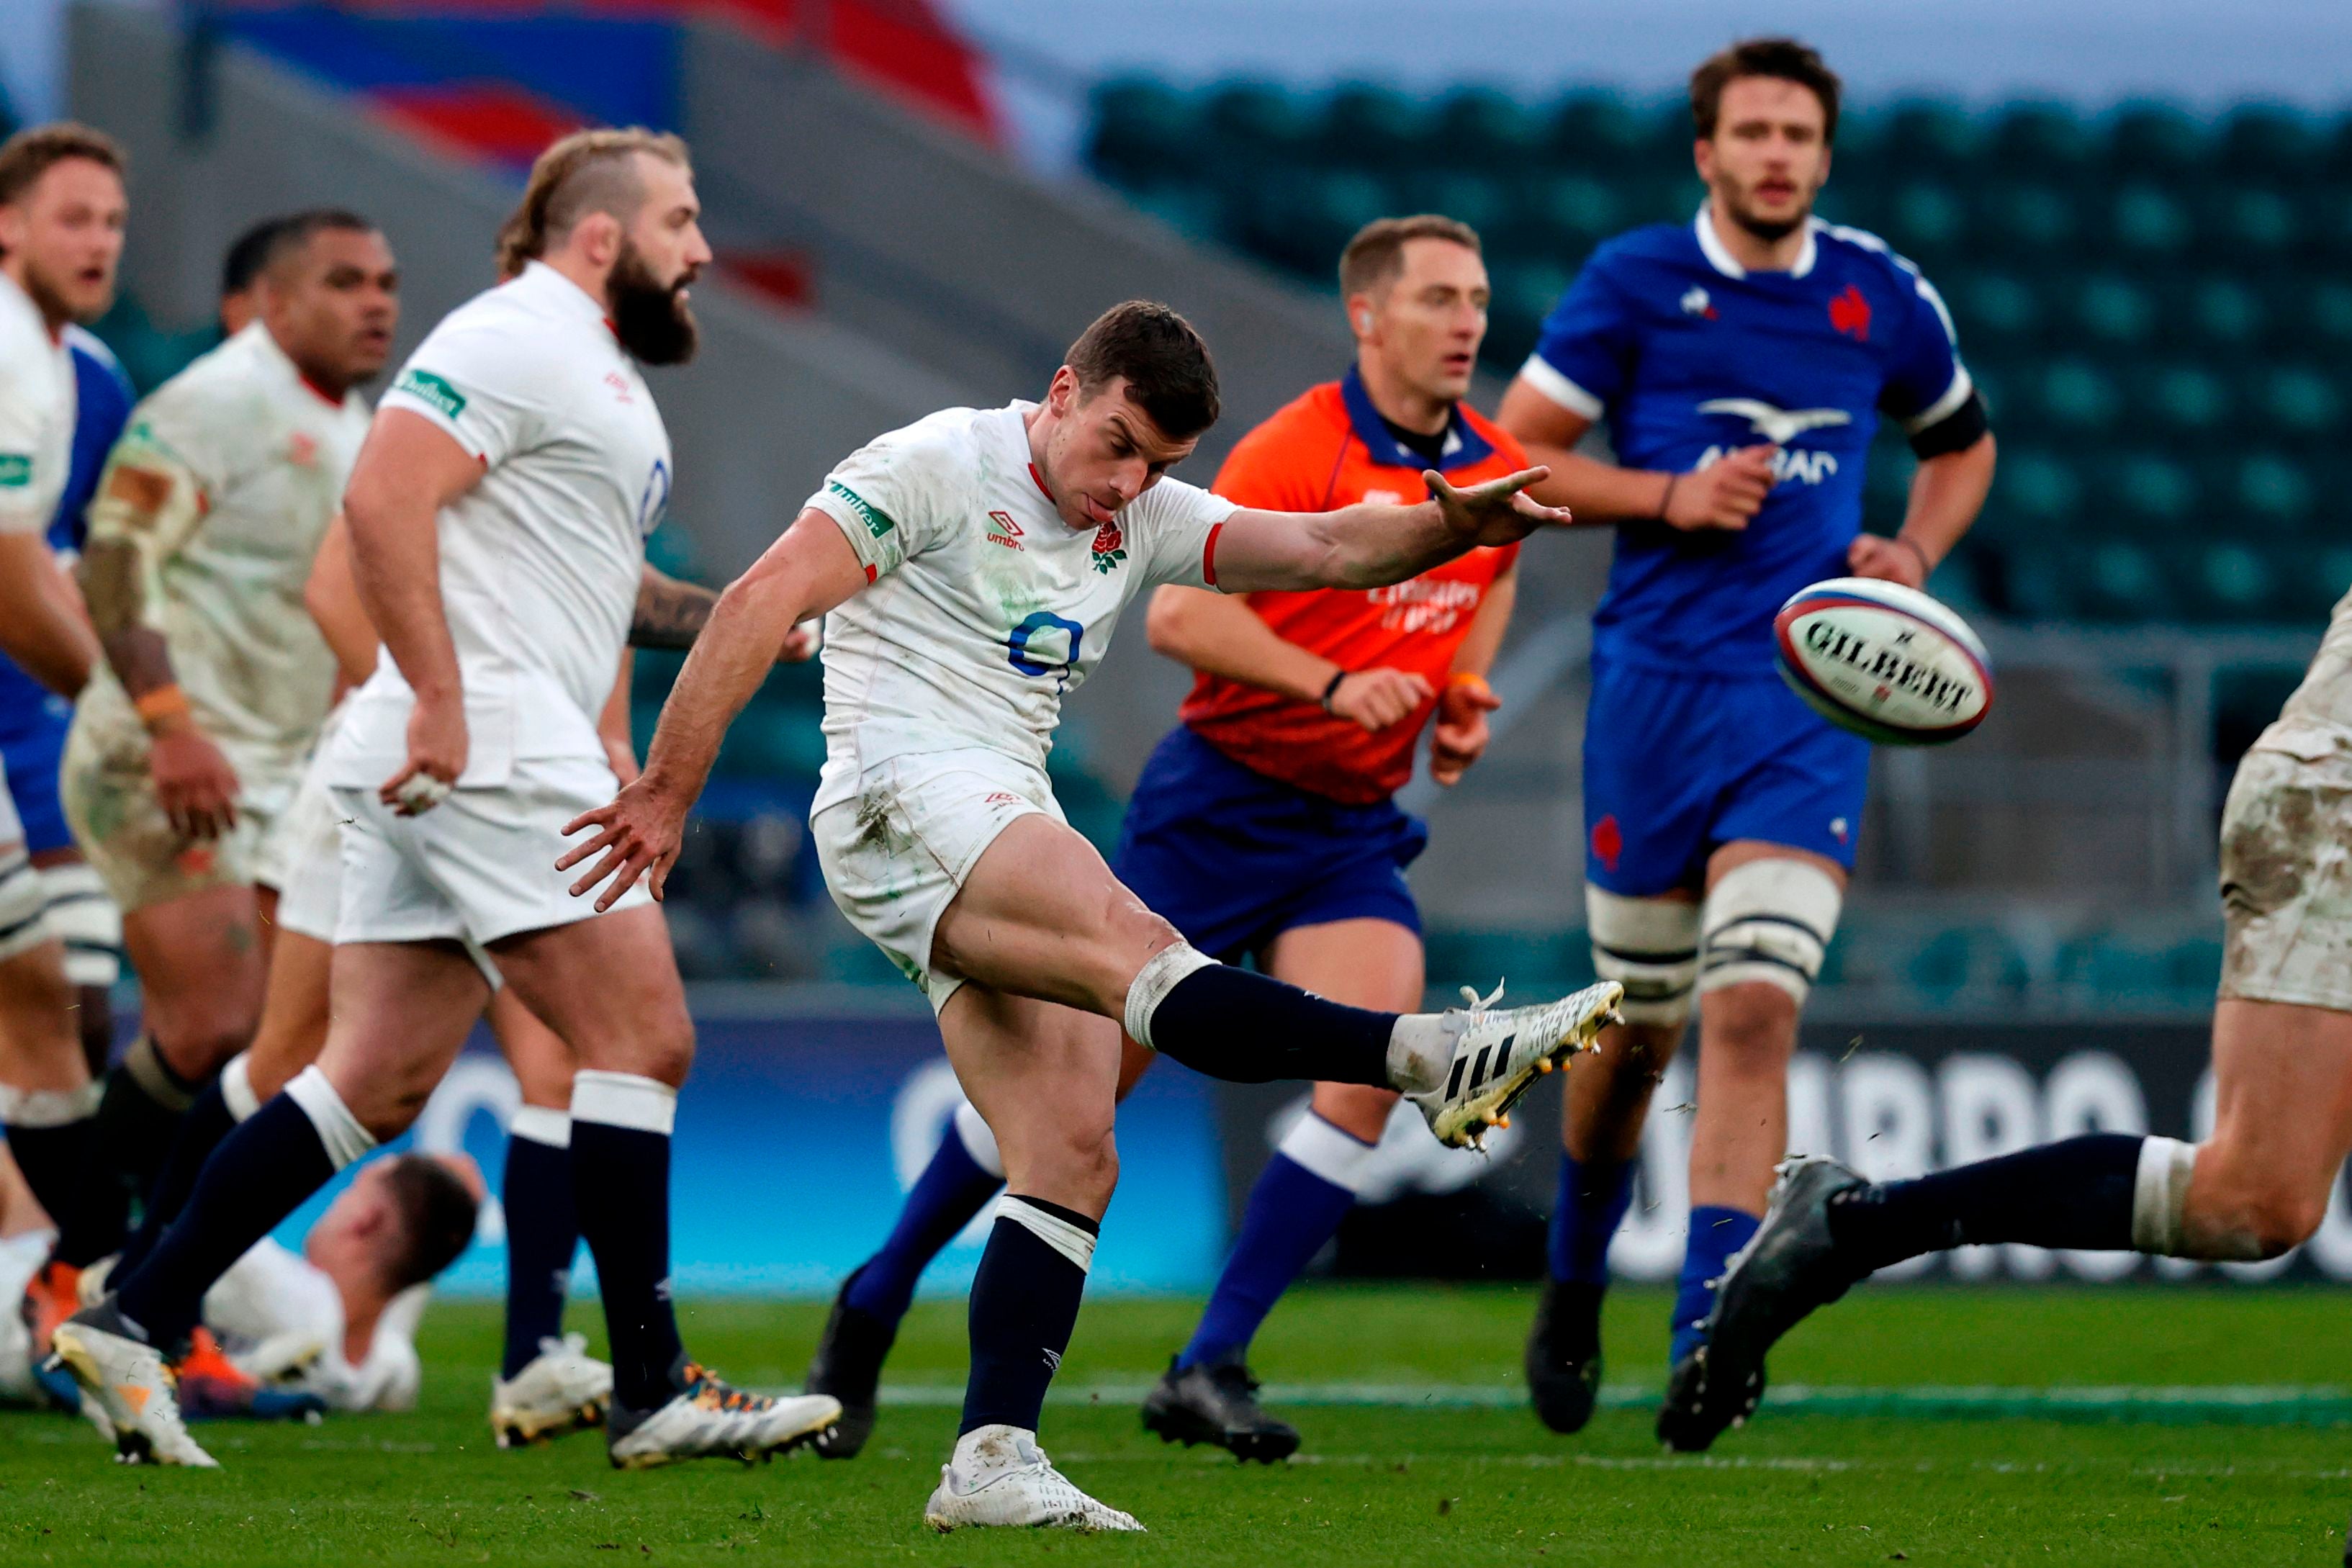 George Ford steered England to victory with two dazzling kicks in the closing stages